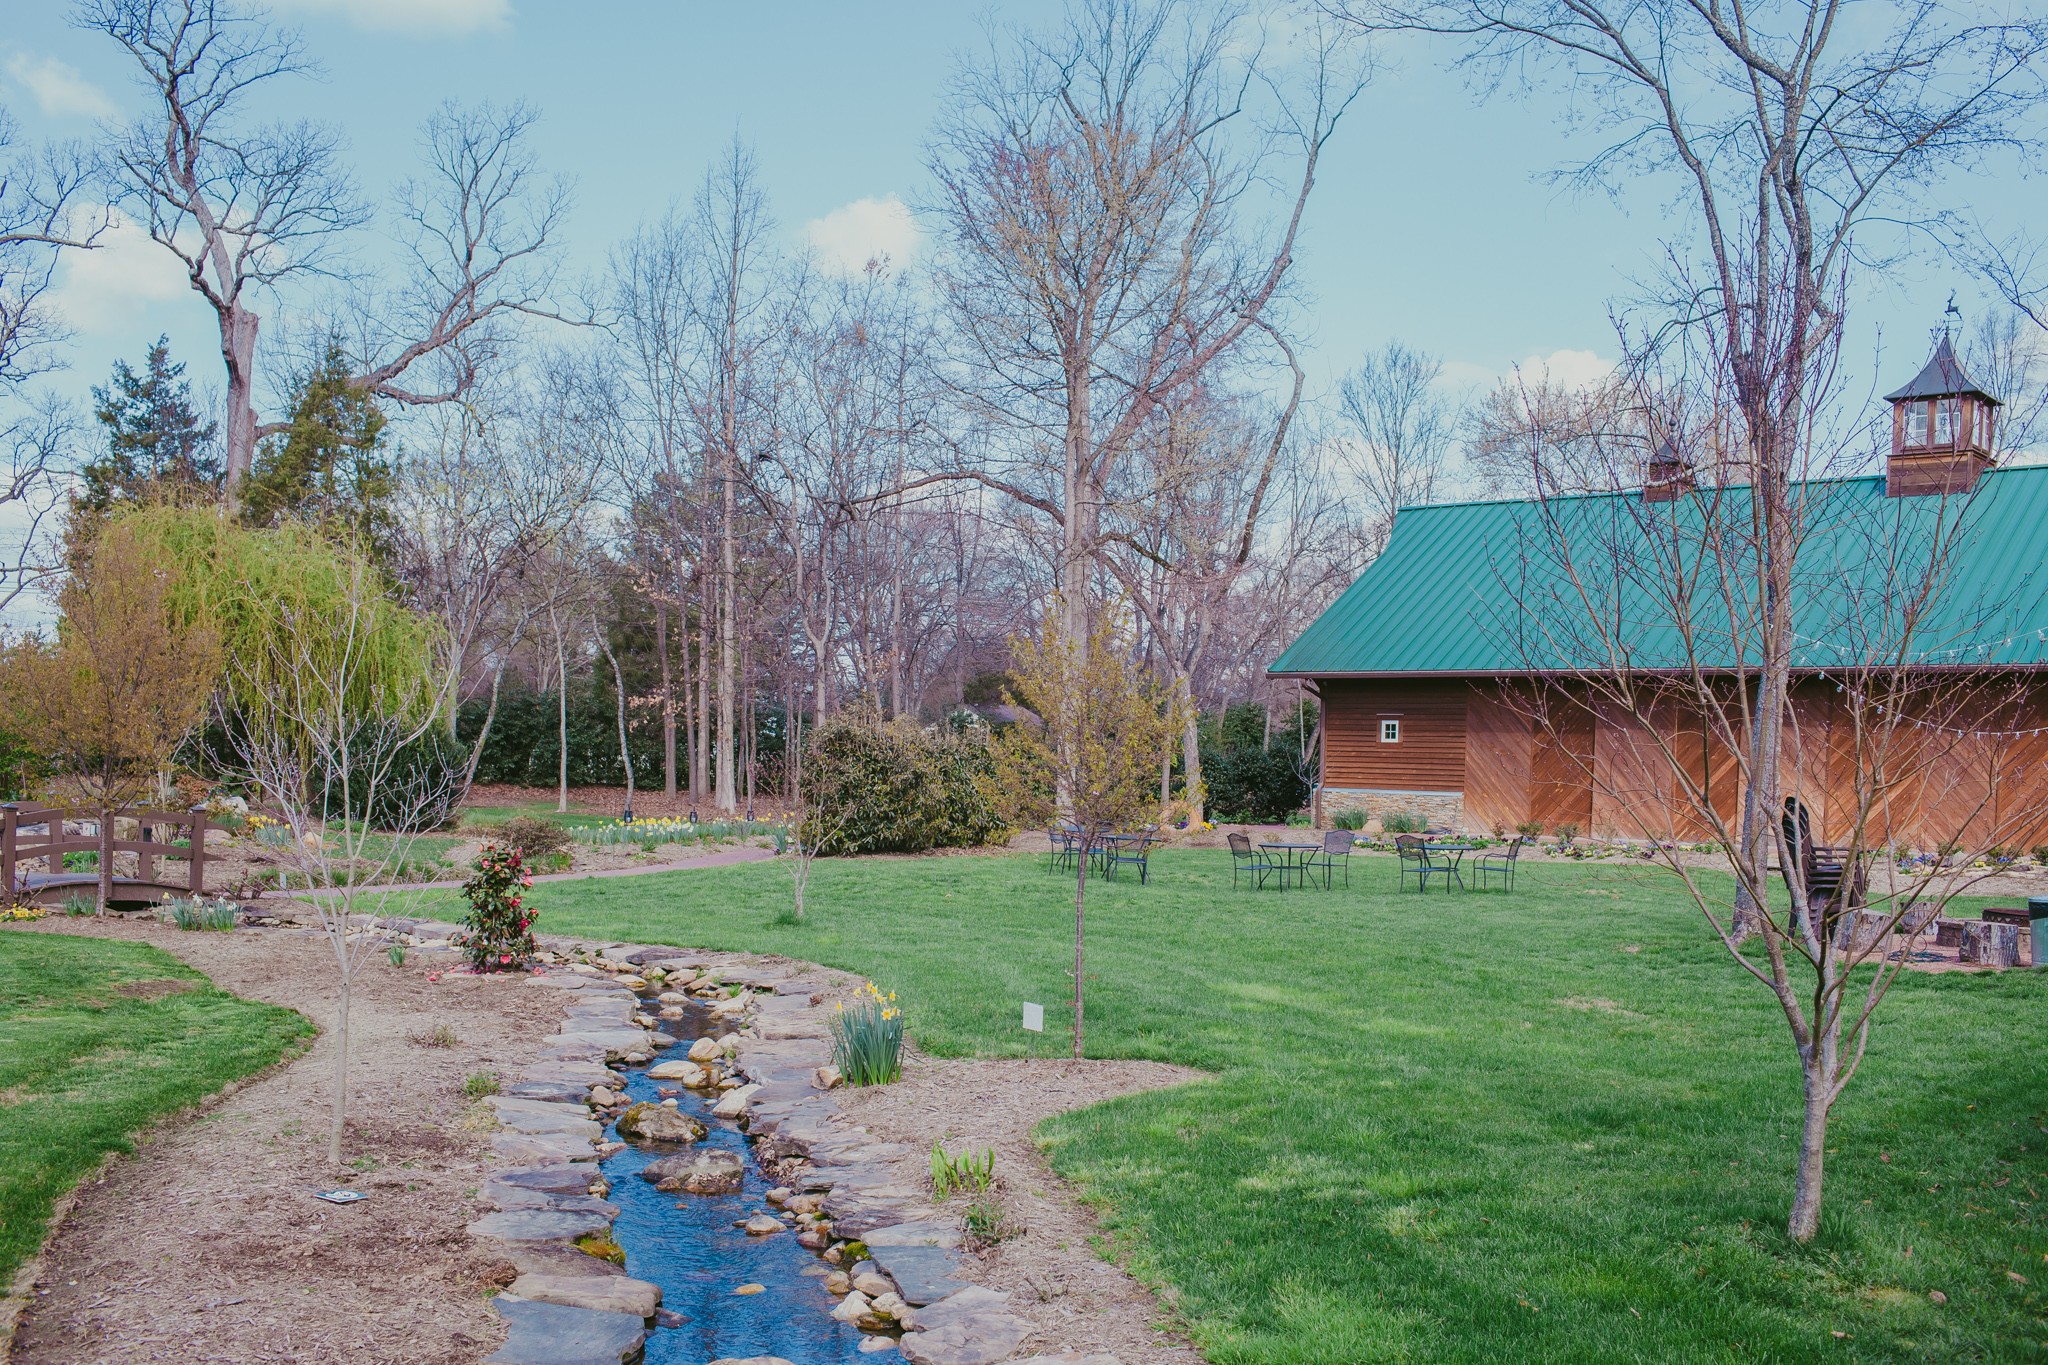 A view of the creek & barn at Alexander Homestead